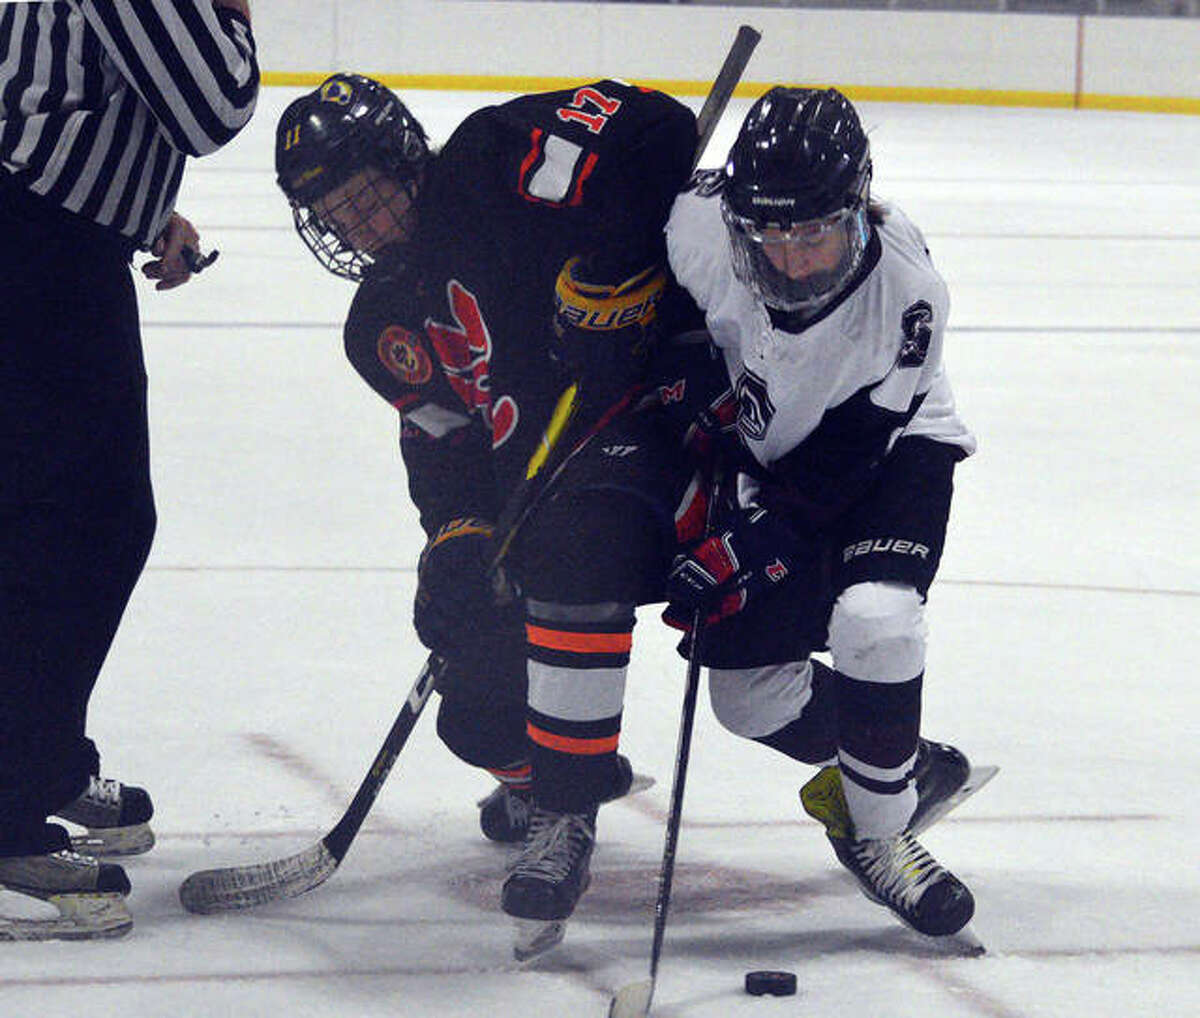 Edwardsville’s Carter Zimmer, left, scored the game's lone goal in a 1-0 win over Walter Johnson (Maryland) on Thursday in the opener of the U.S. National Ice Hockey Tournament in Plano.